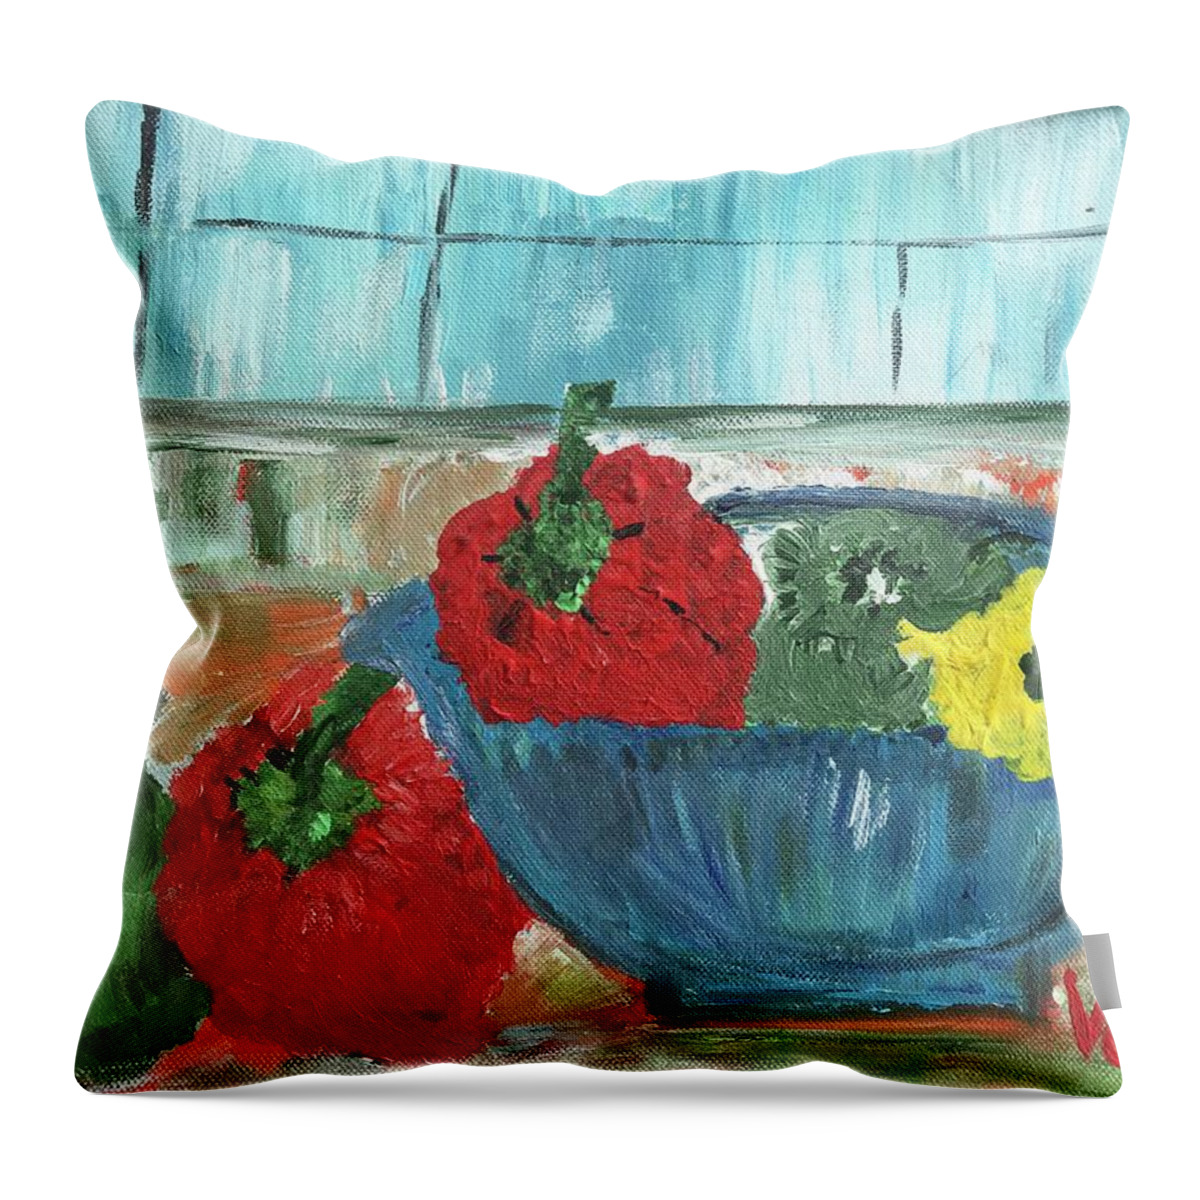 Blucvase Throw Pillow featuring the painting Karens Blue Vase by Clare Ventura